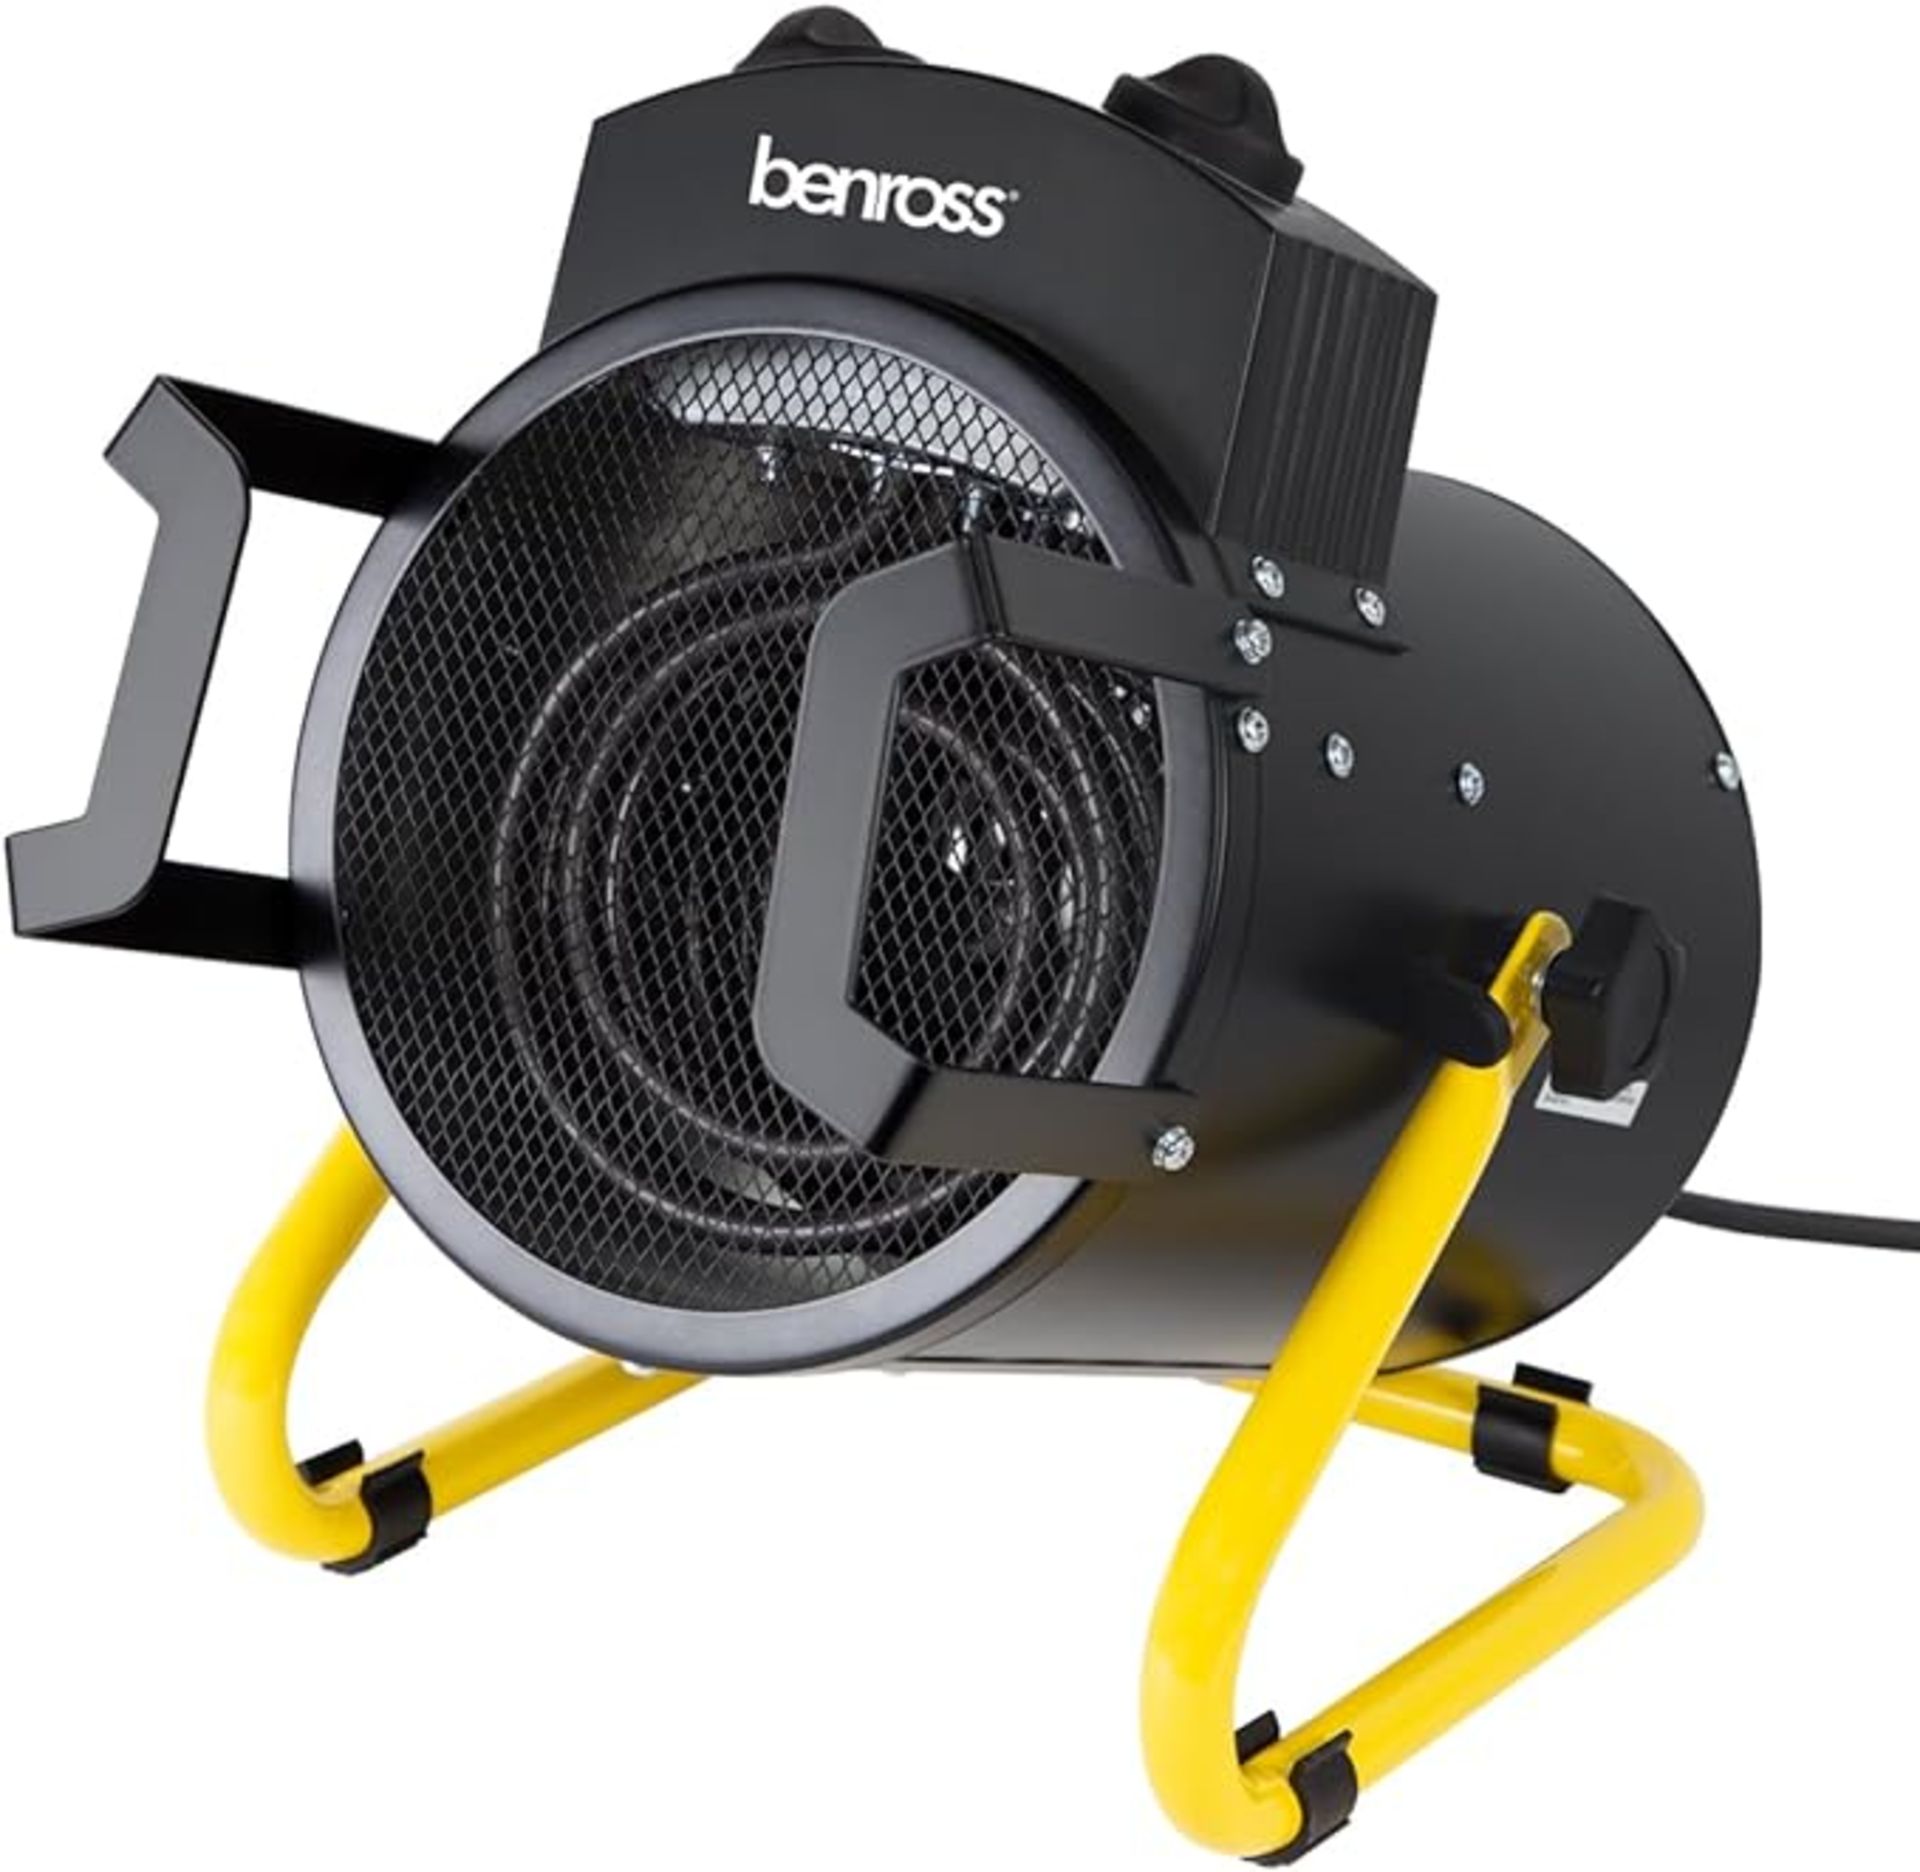 Benross 42450 3000W Industrial Fan Heater/Adjustable Thermostatic Control/Cool Air Setting/Tilting